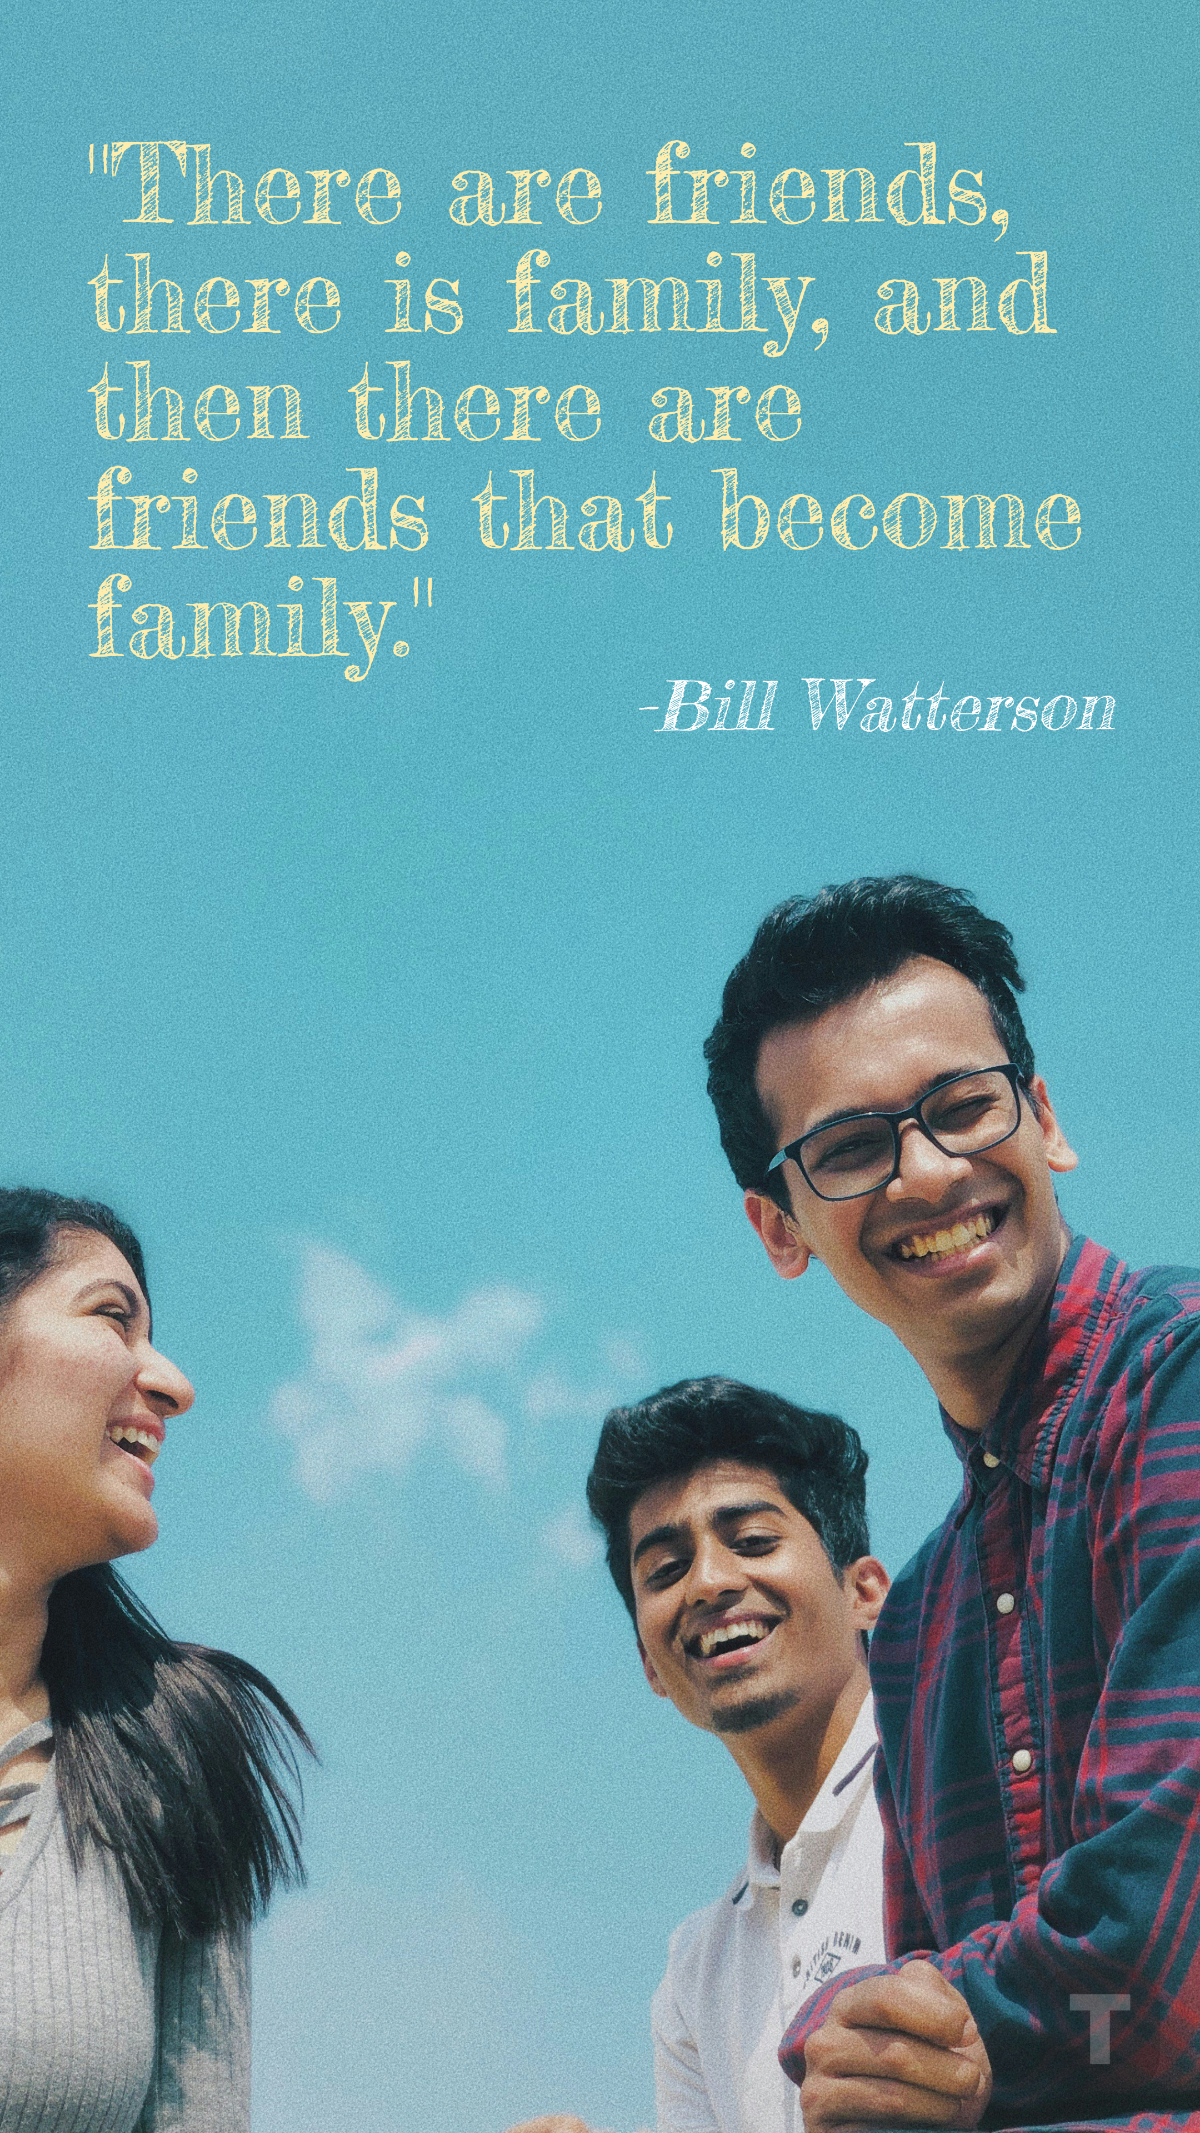 Friendship Day Family Quote